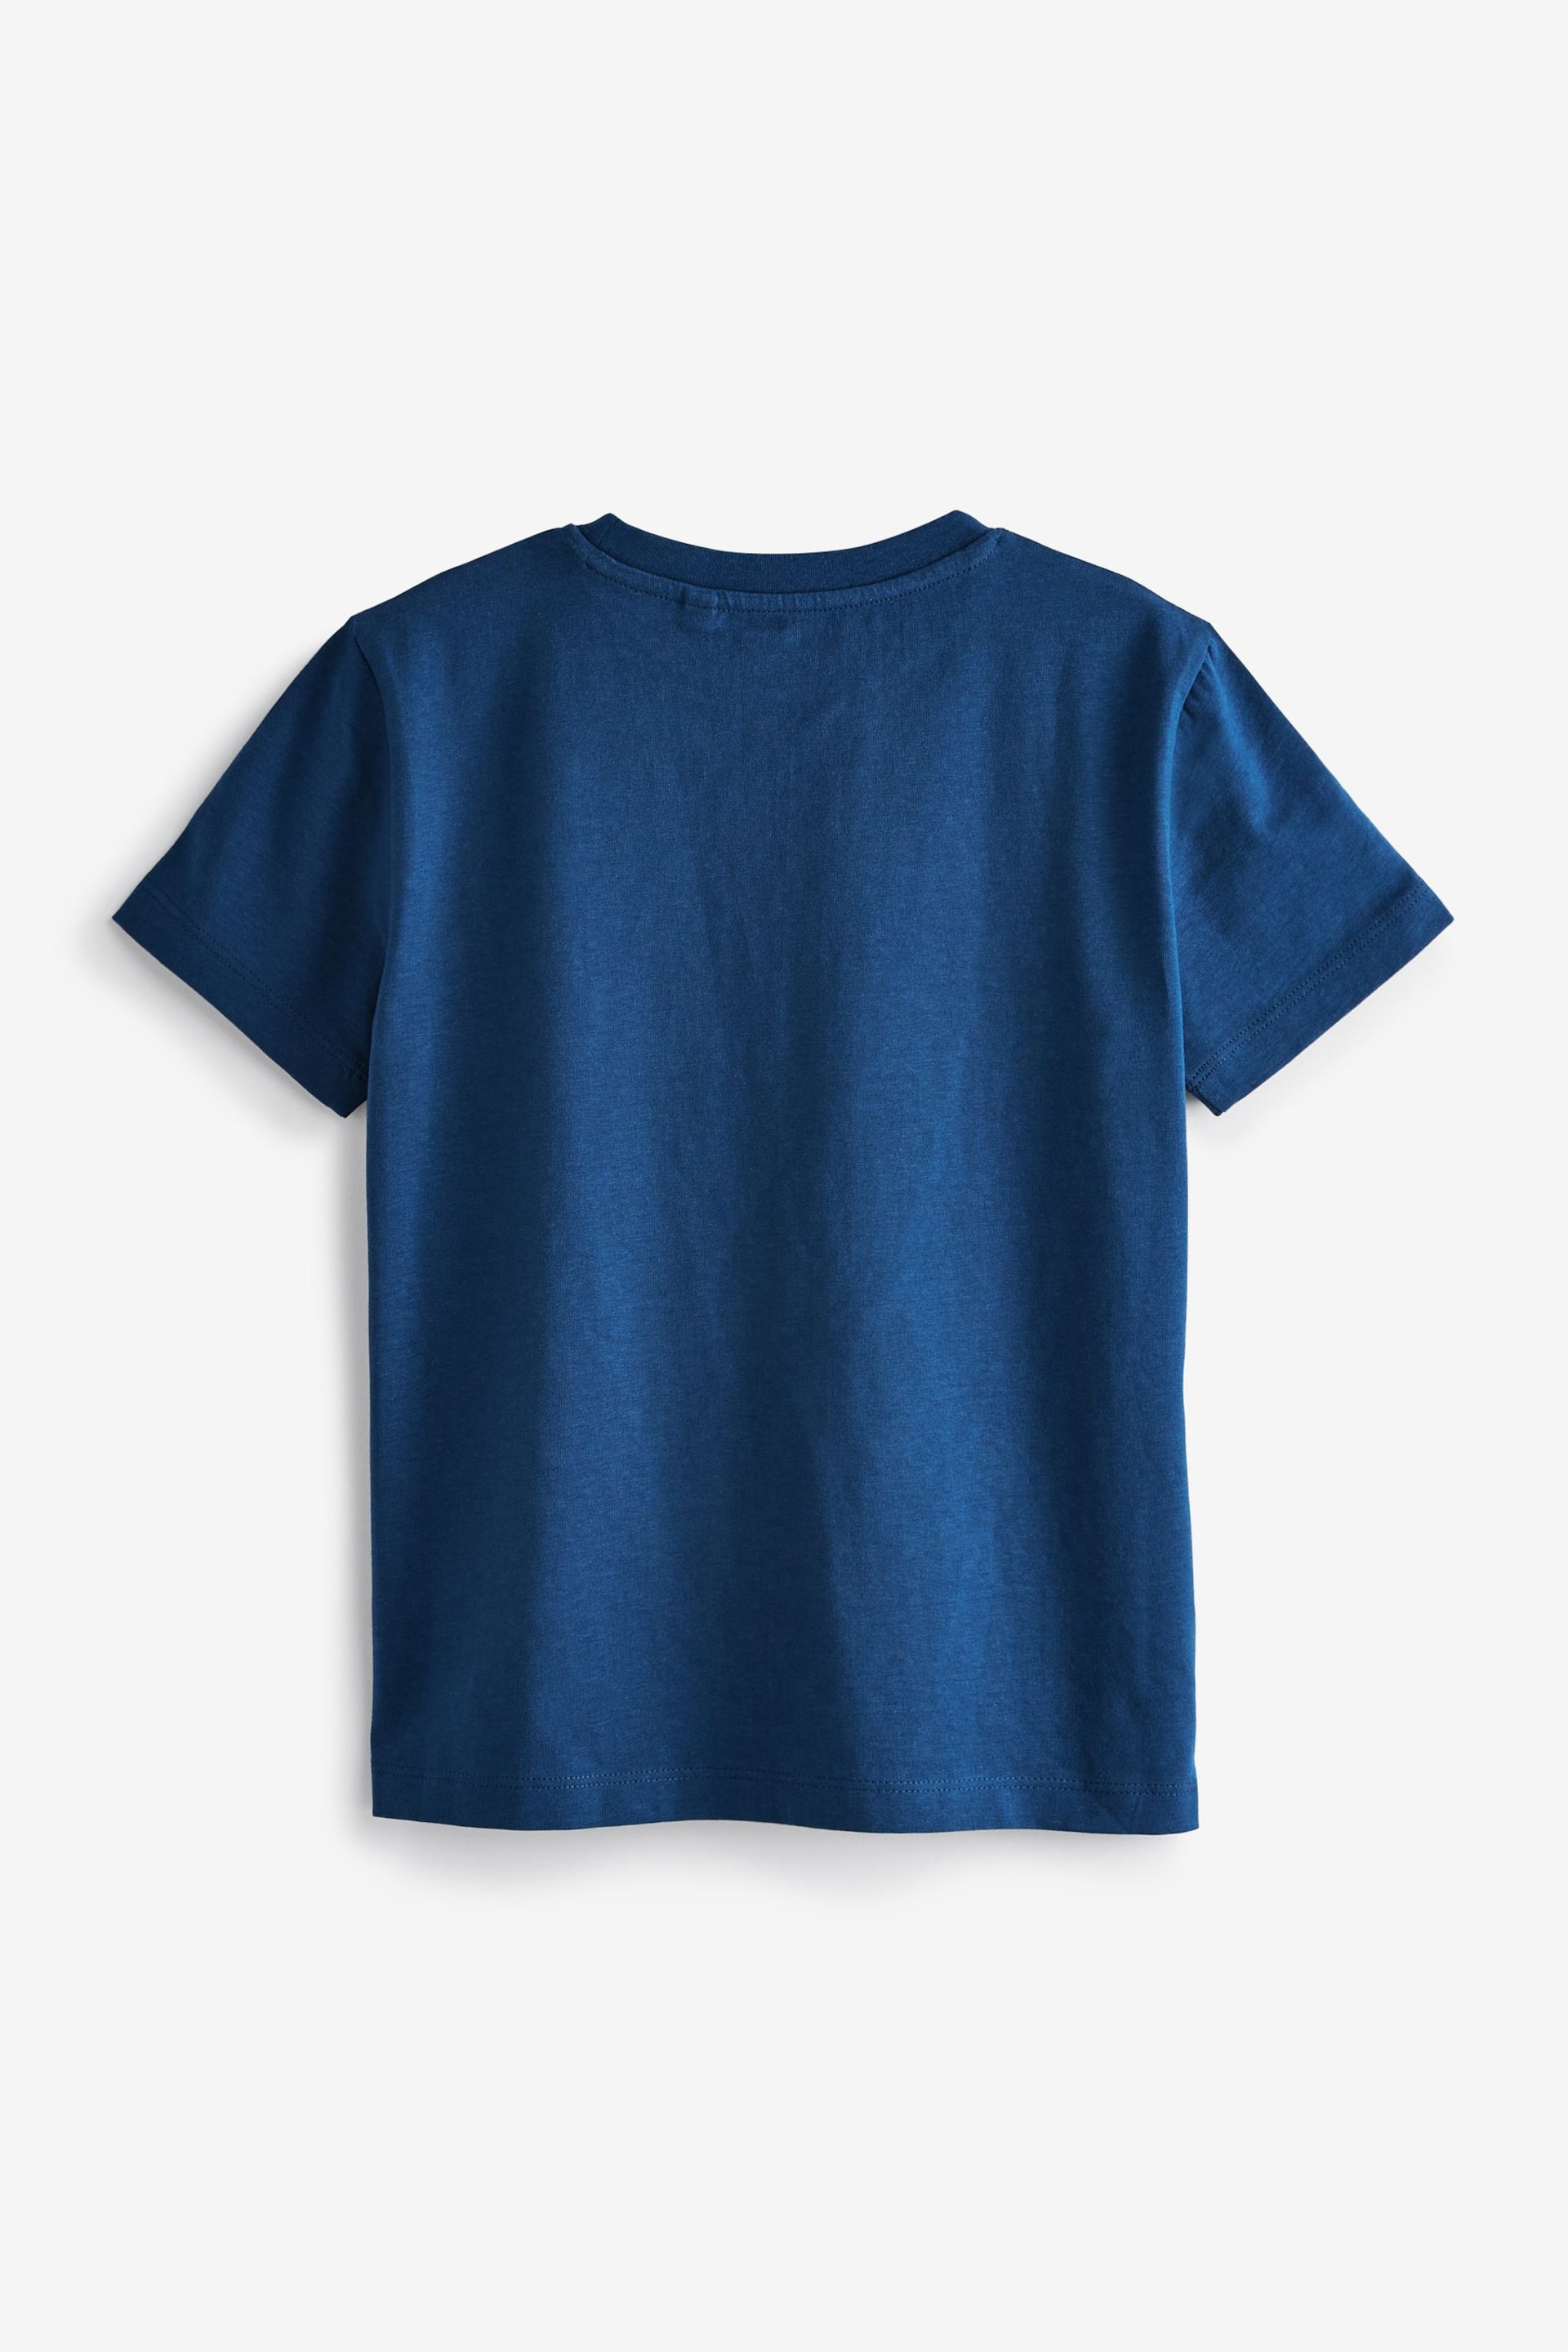 Blues Short Sleeves T-Shirts 4 Pack (3-16yrs) - Image 2 of 5